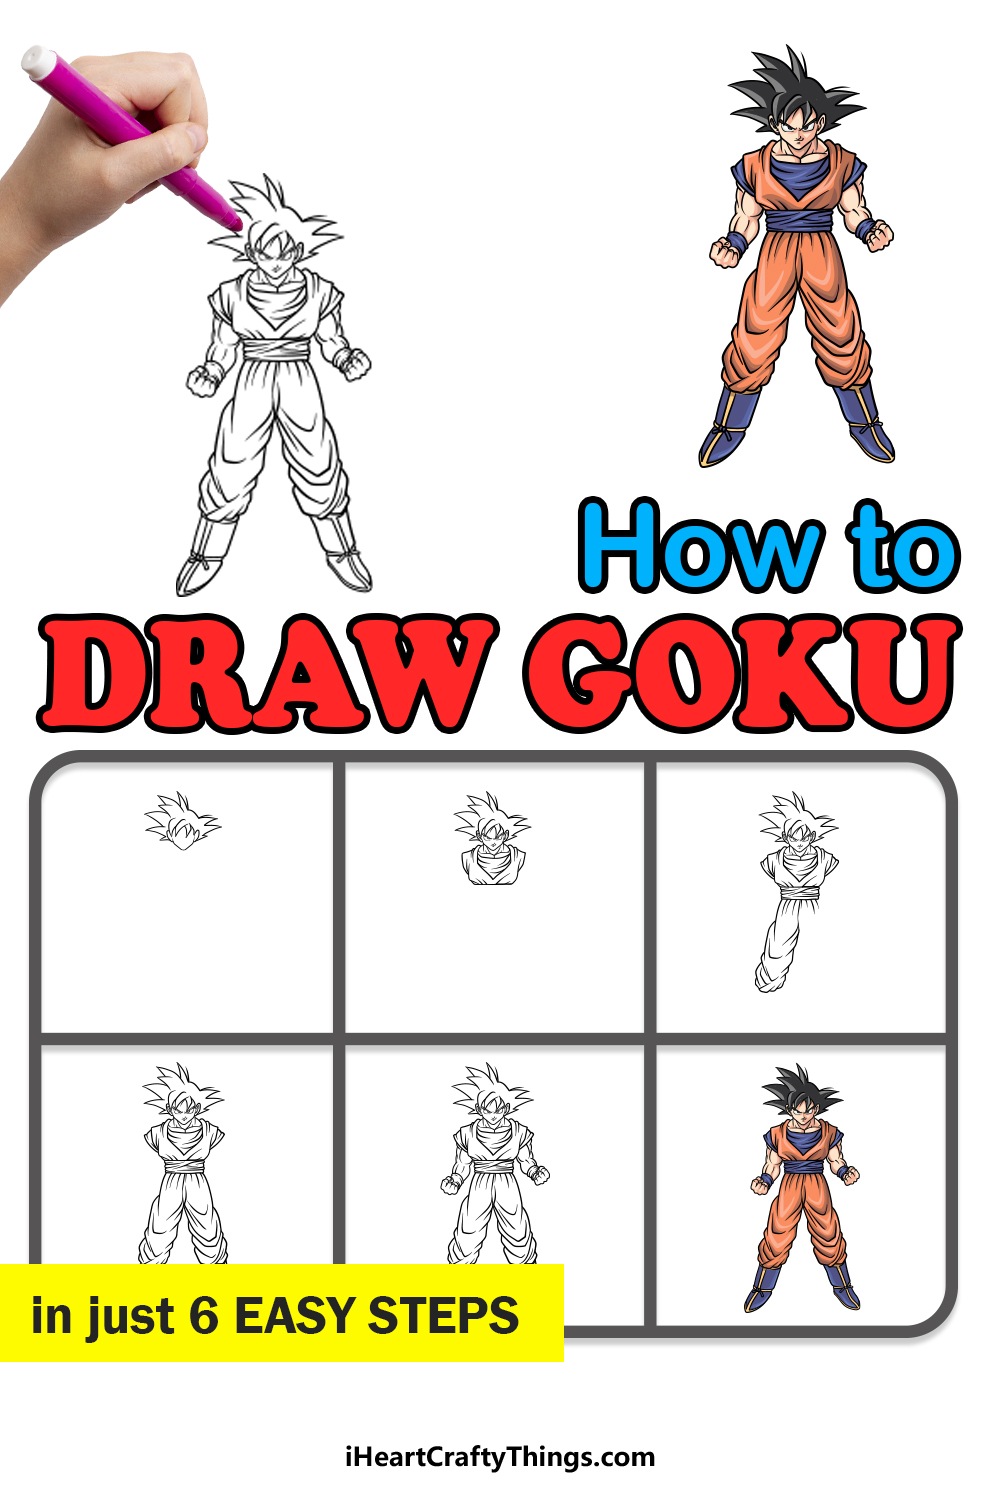 How to draw Goku in 6 easy steps